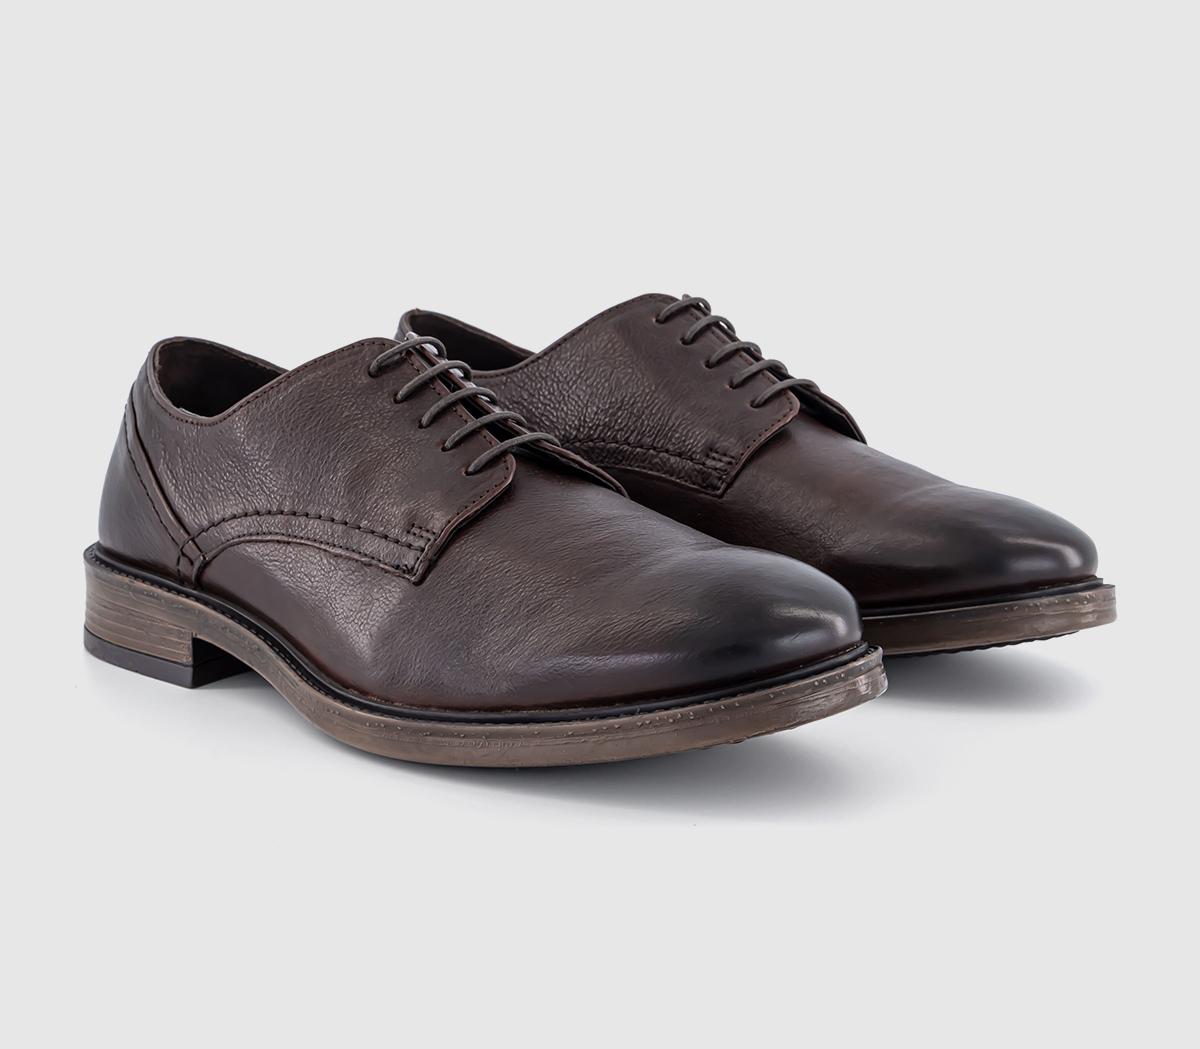 OFFICE Cadeleigh Casual Leather Derby Shoes Brown, 7